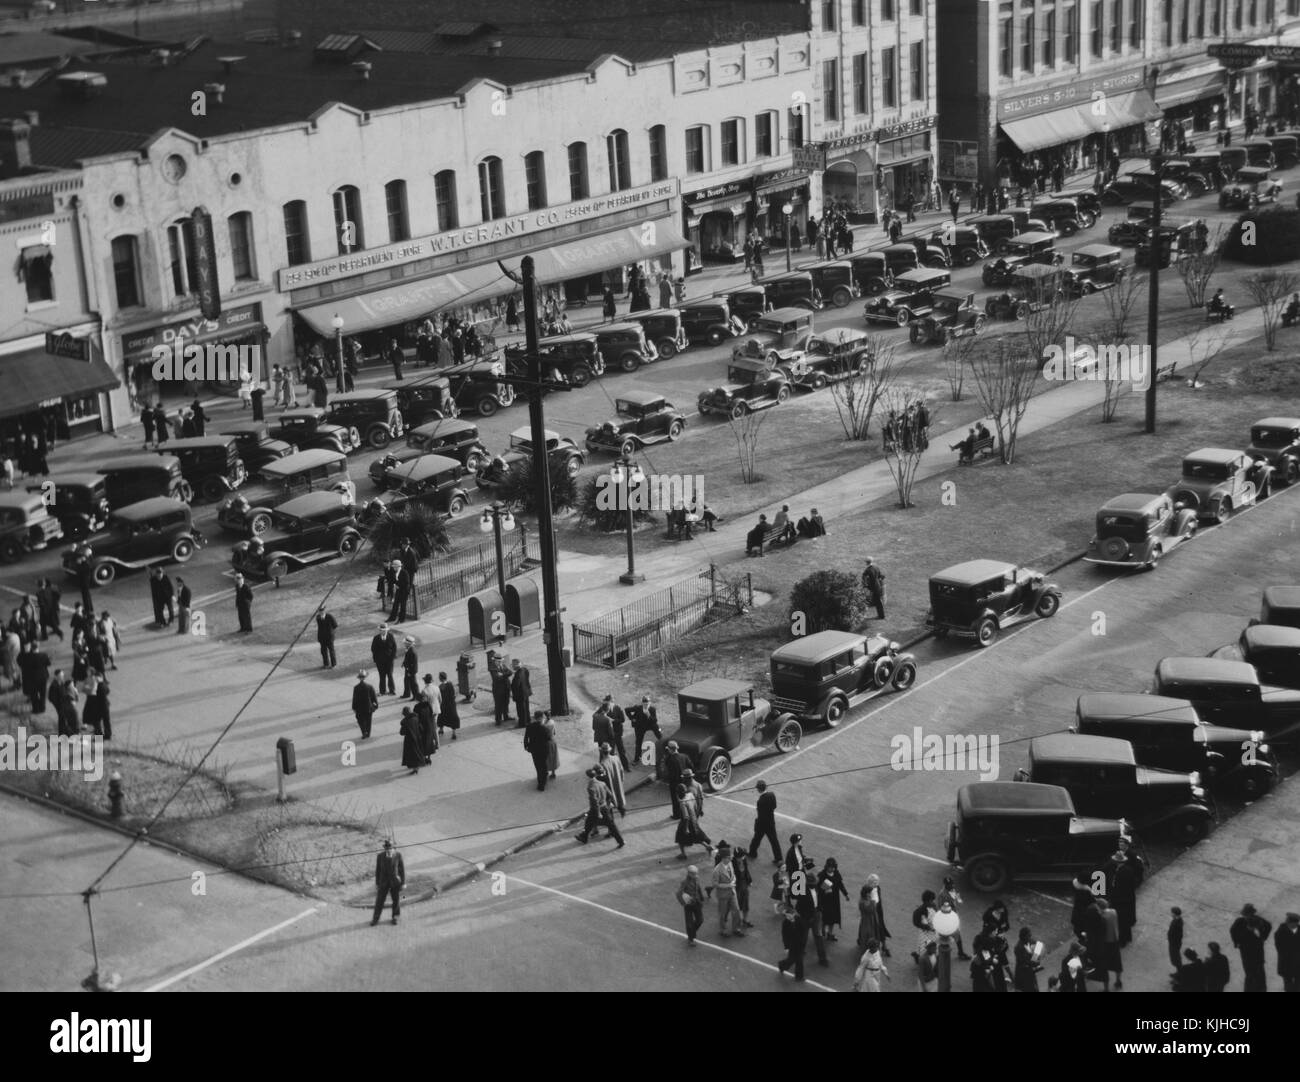 Black and white photograph of a Main Street, many cars parked along the street, people walking across the road, by Walker Evans, American photographer known for his work for the Farm Security Administration documenting the effects of the Great Depression, Macon, Georgia, 1936. From the New York Public Library. Stock Photo